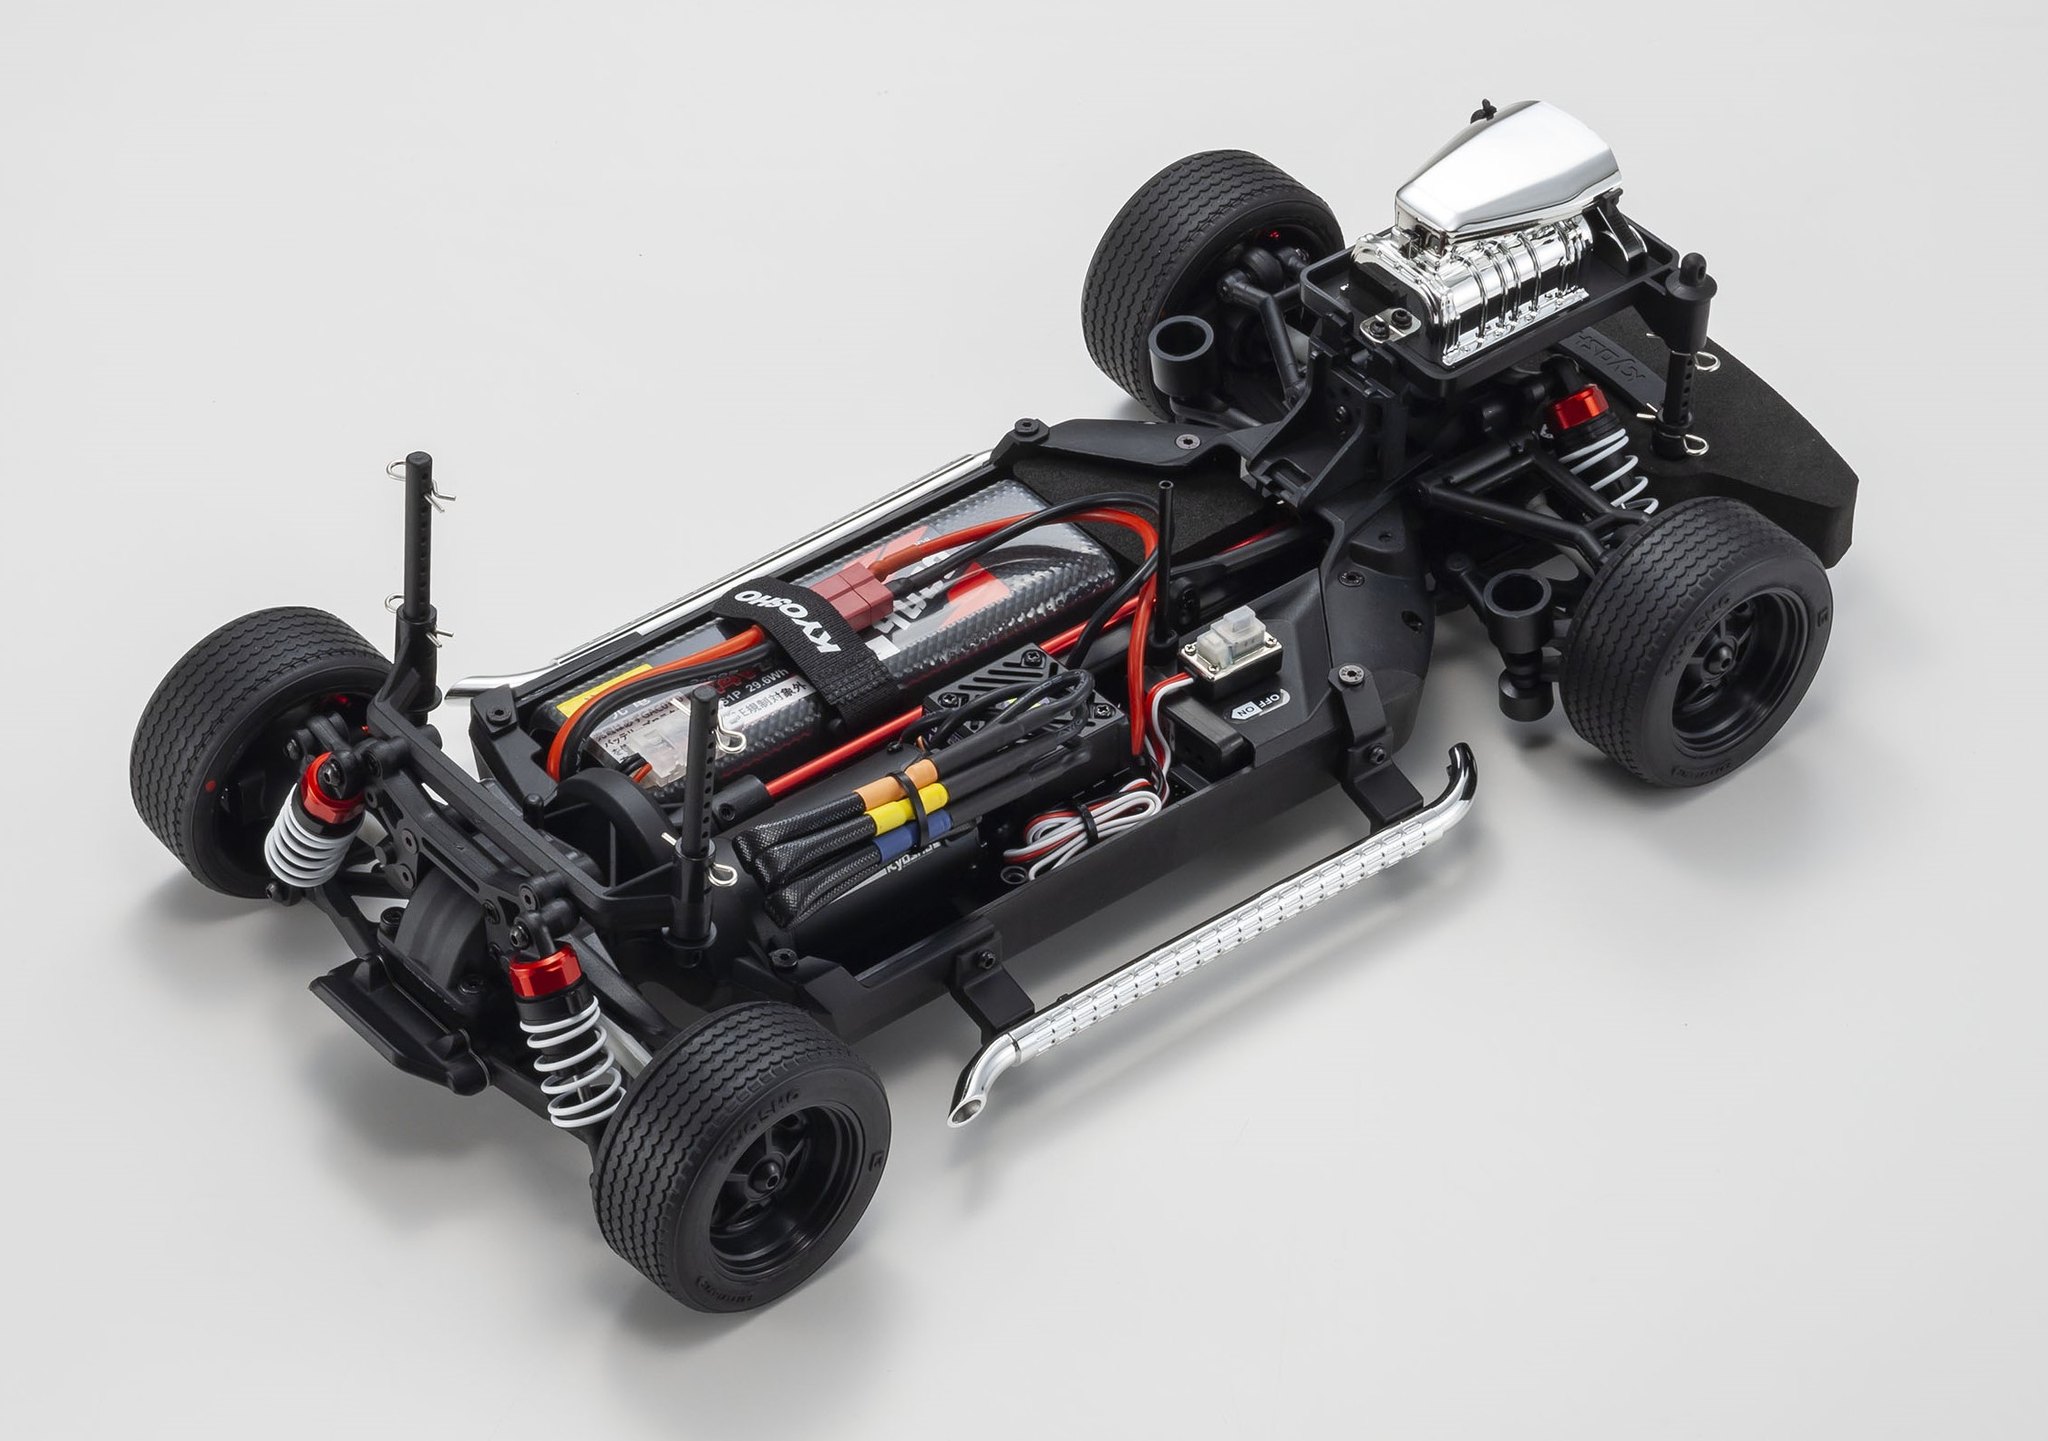 Kyosho 1970 Chevy Chevelle Super Charged Brushless